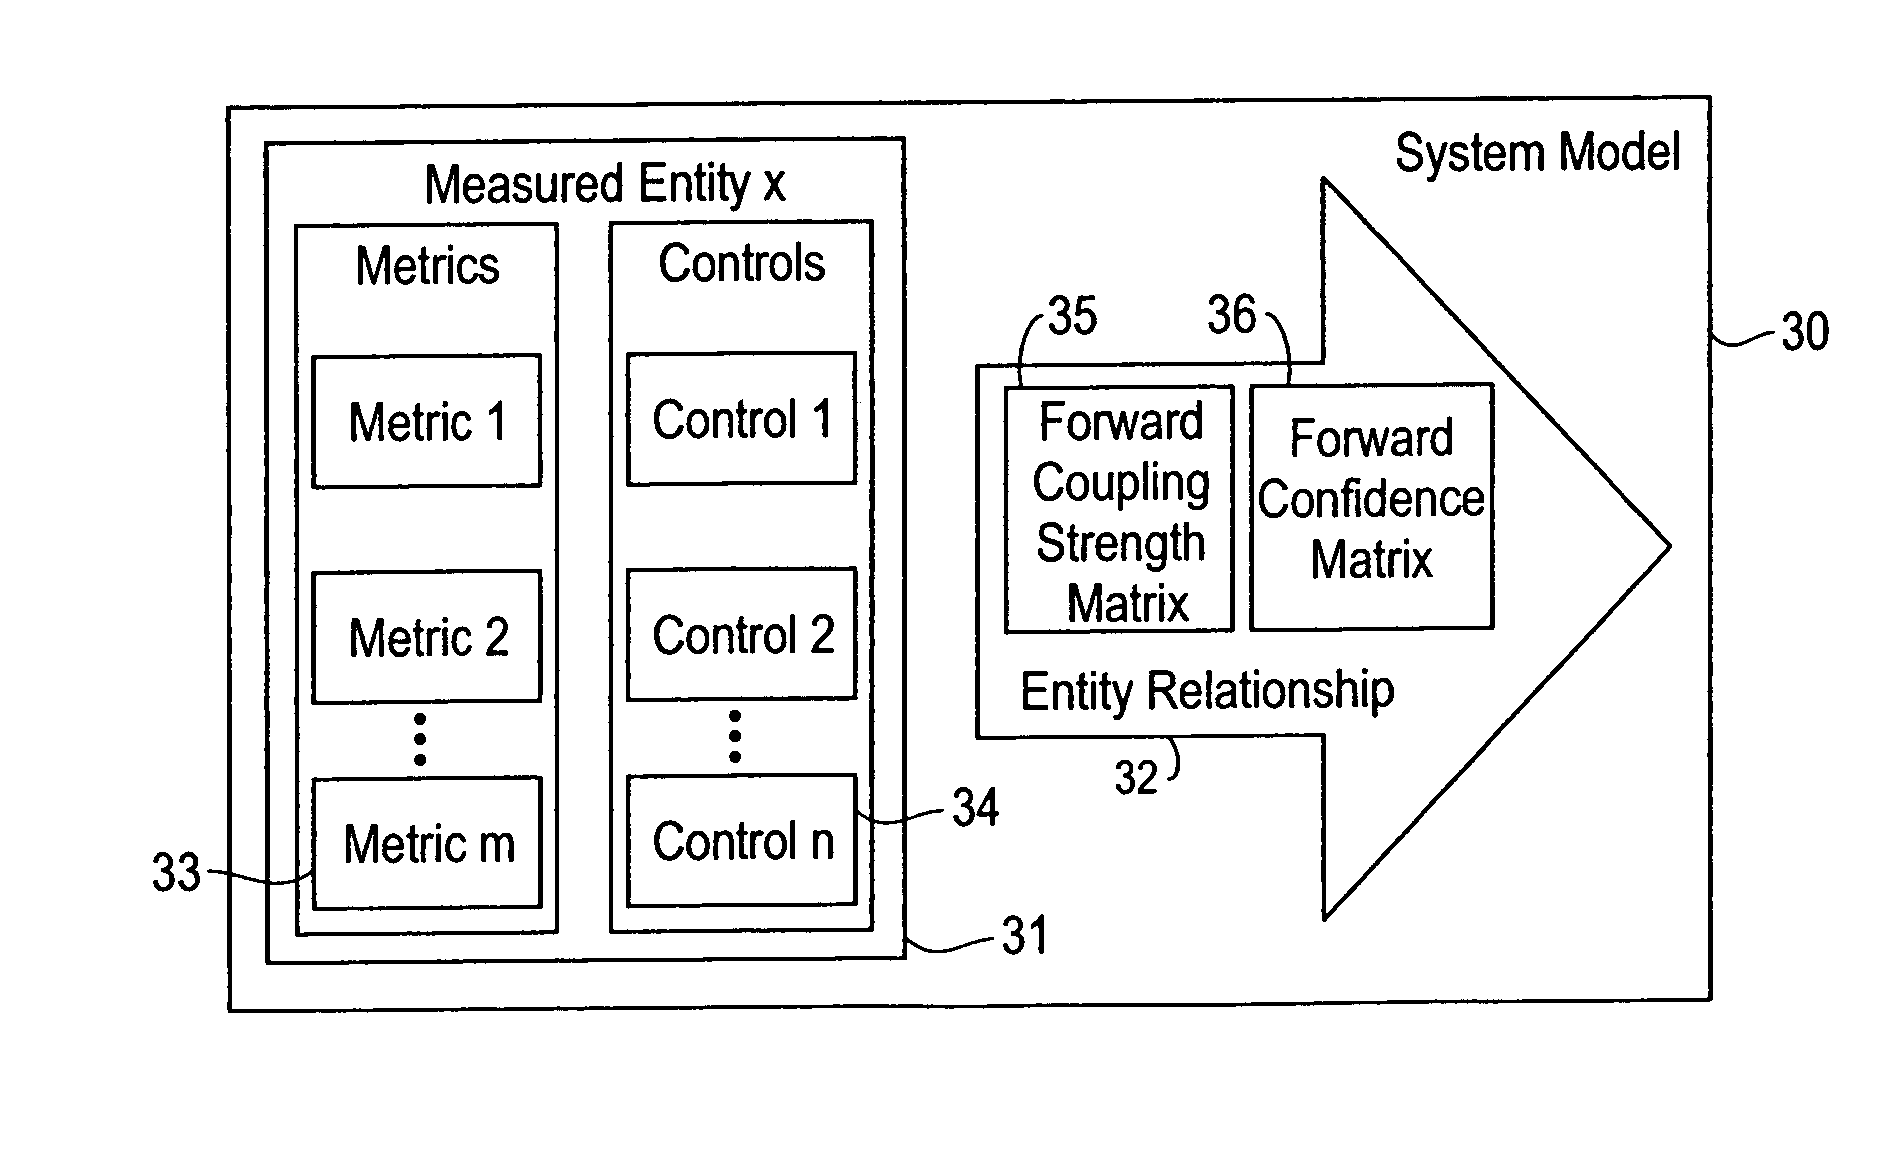 System and method for managing the performance of a computer system based on operational characteristics of the system components